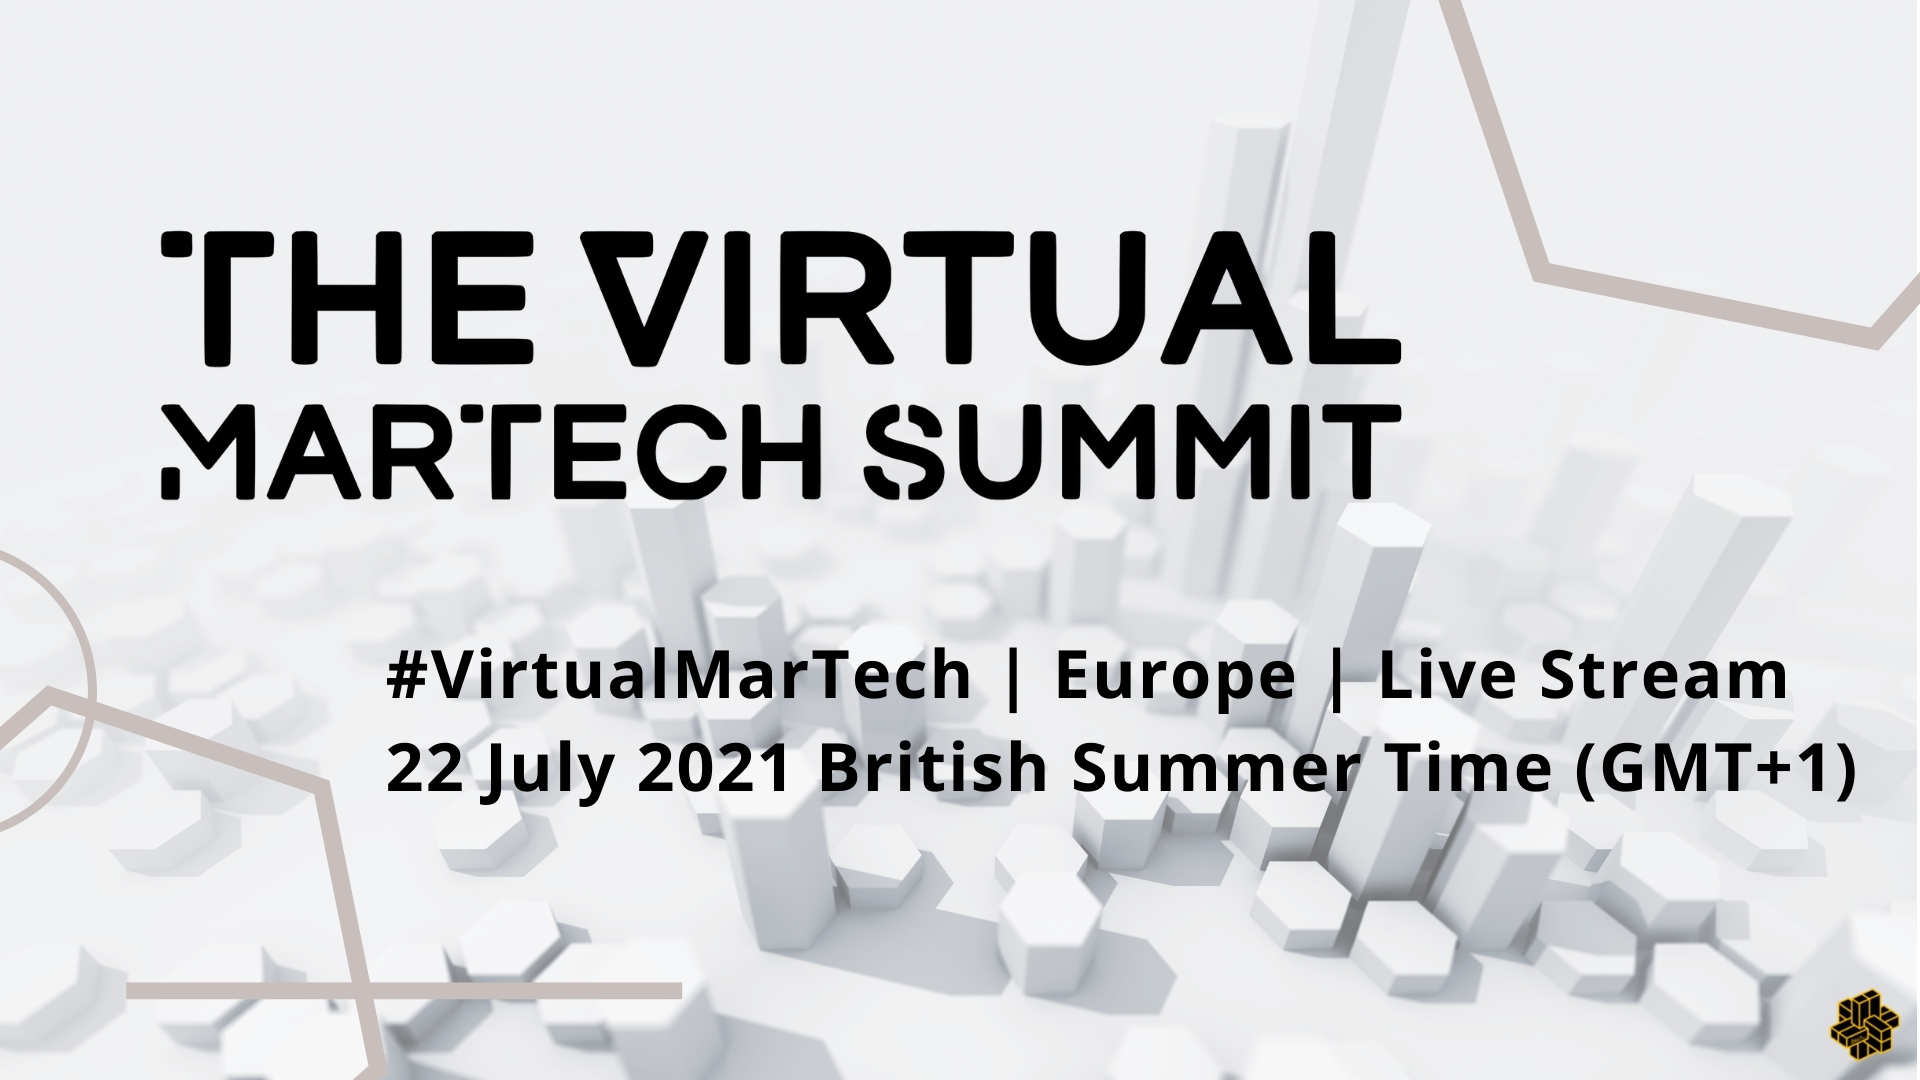 The Virtual MarTech Summit Europe organized by BEETc